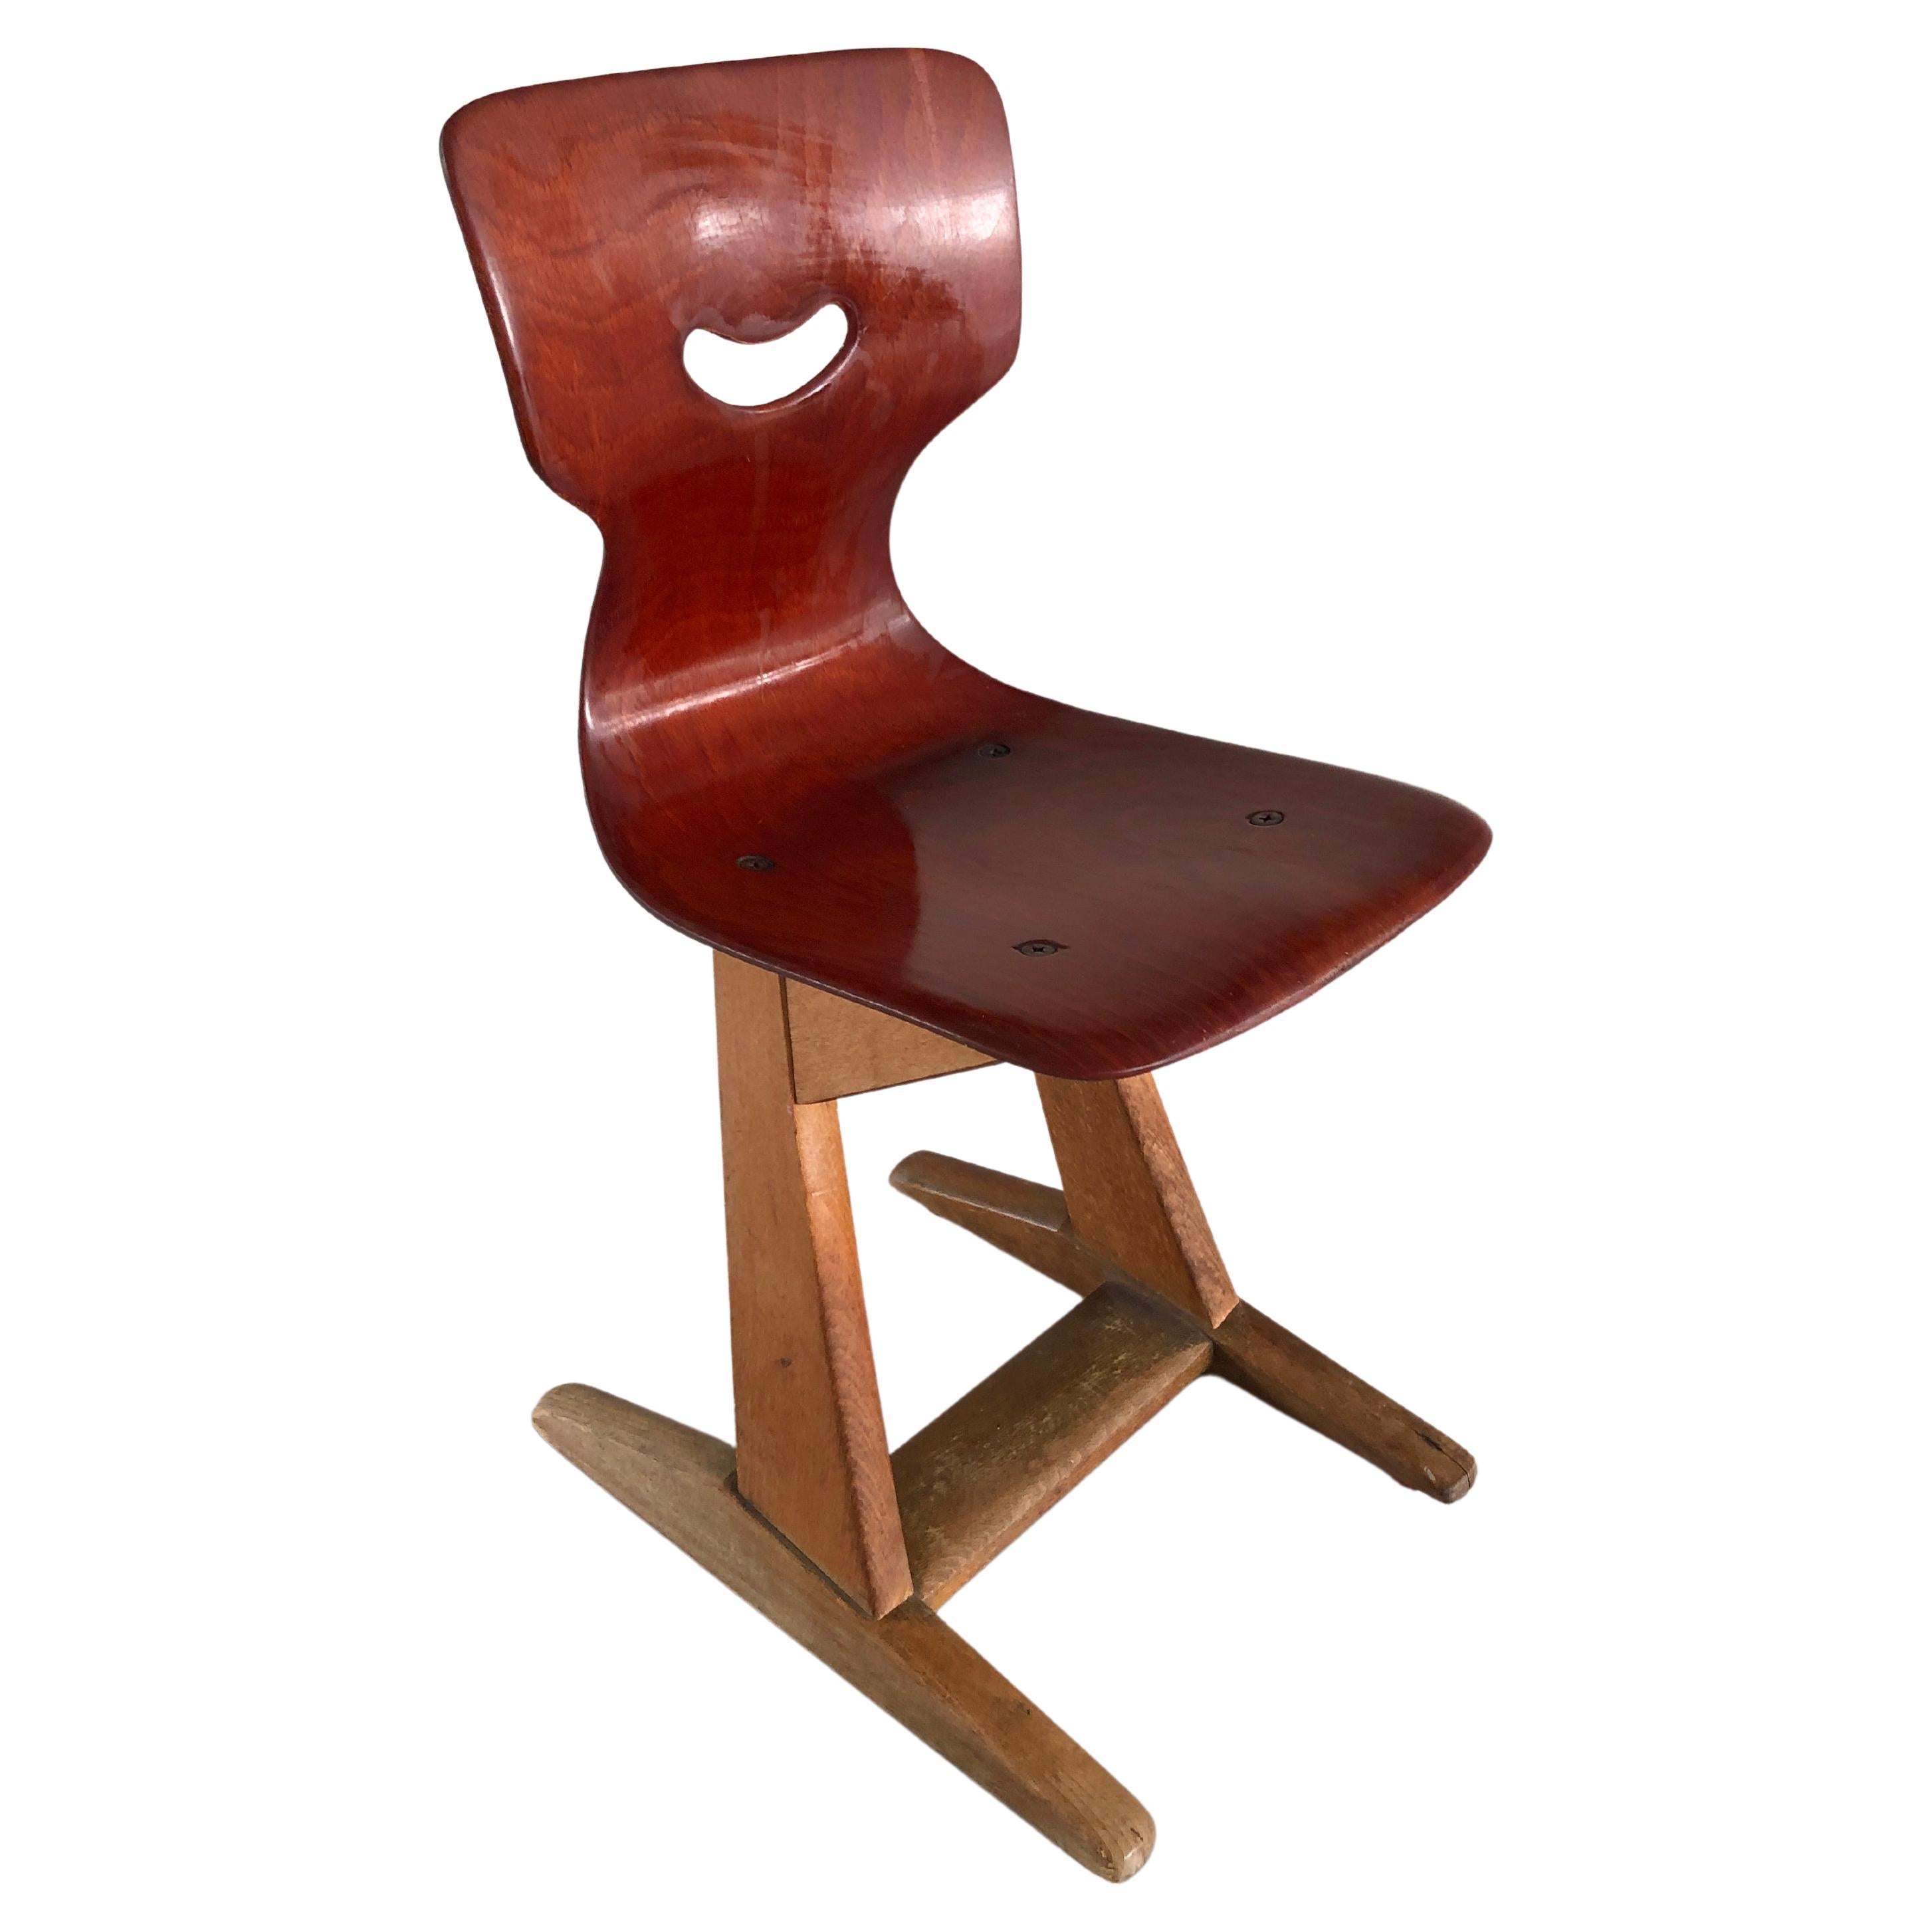 Adam Stegner Flötotto Germany 1960’s Pagholz wood (school) children’s chair For Sale